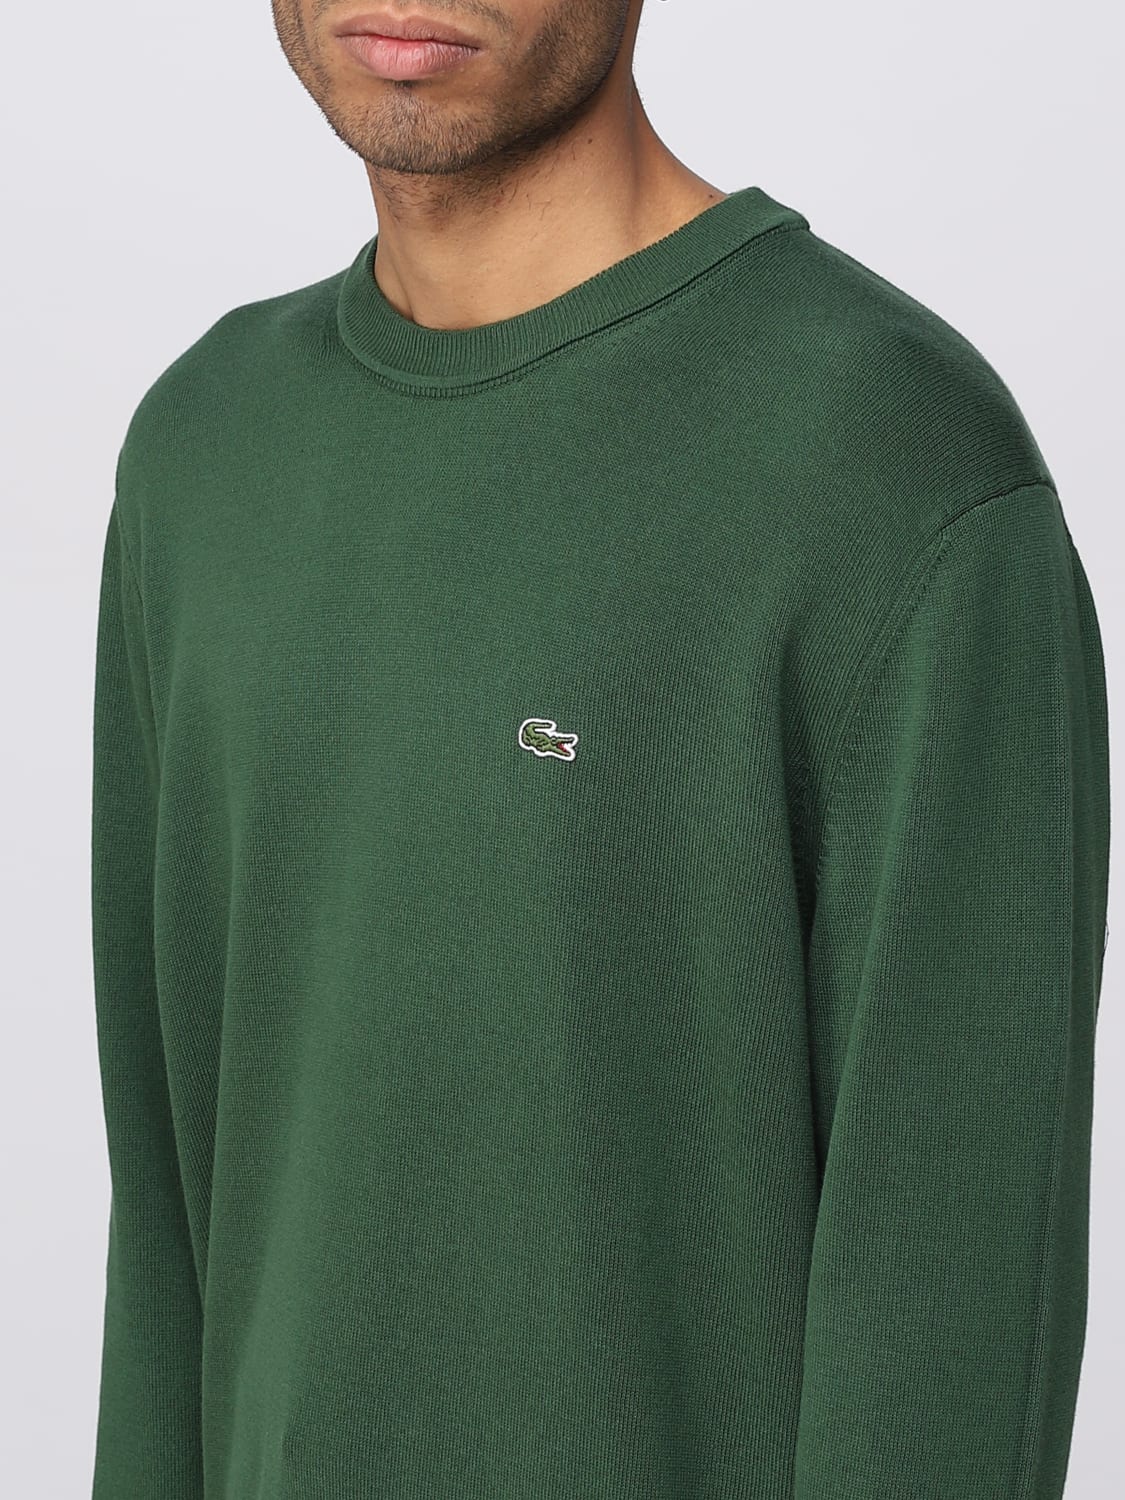 LACOSTE: sweater for man - Green Lacoste sweater AH2193 at